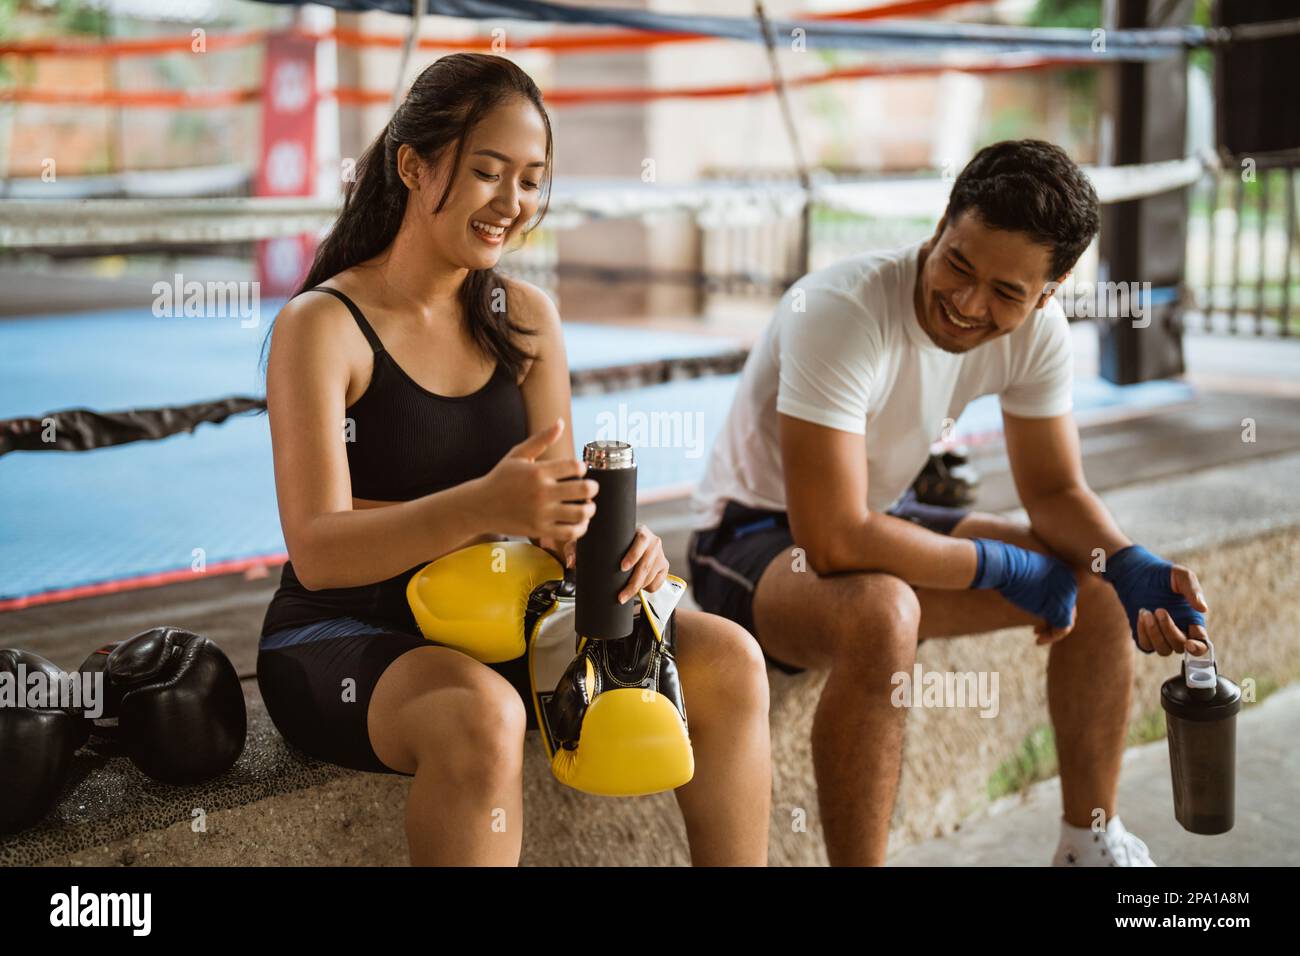 a female boxer and the male boxer sitting and laughing together Stock Photo